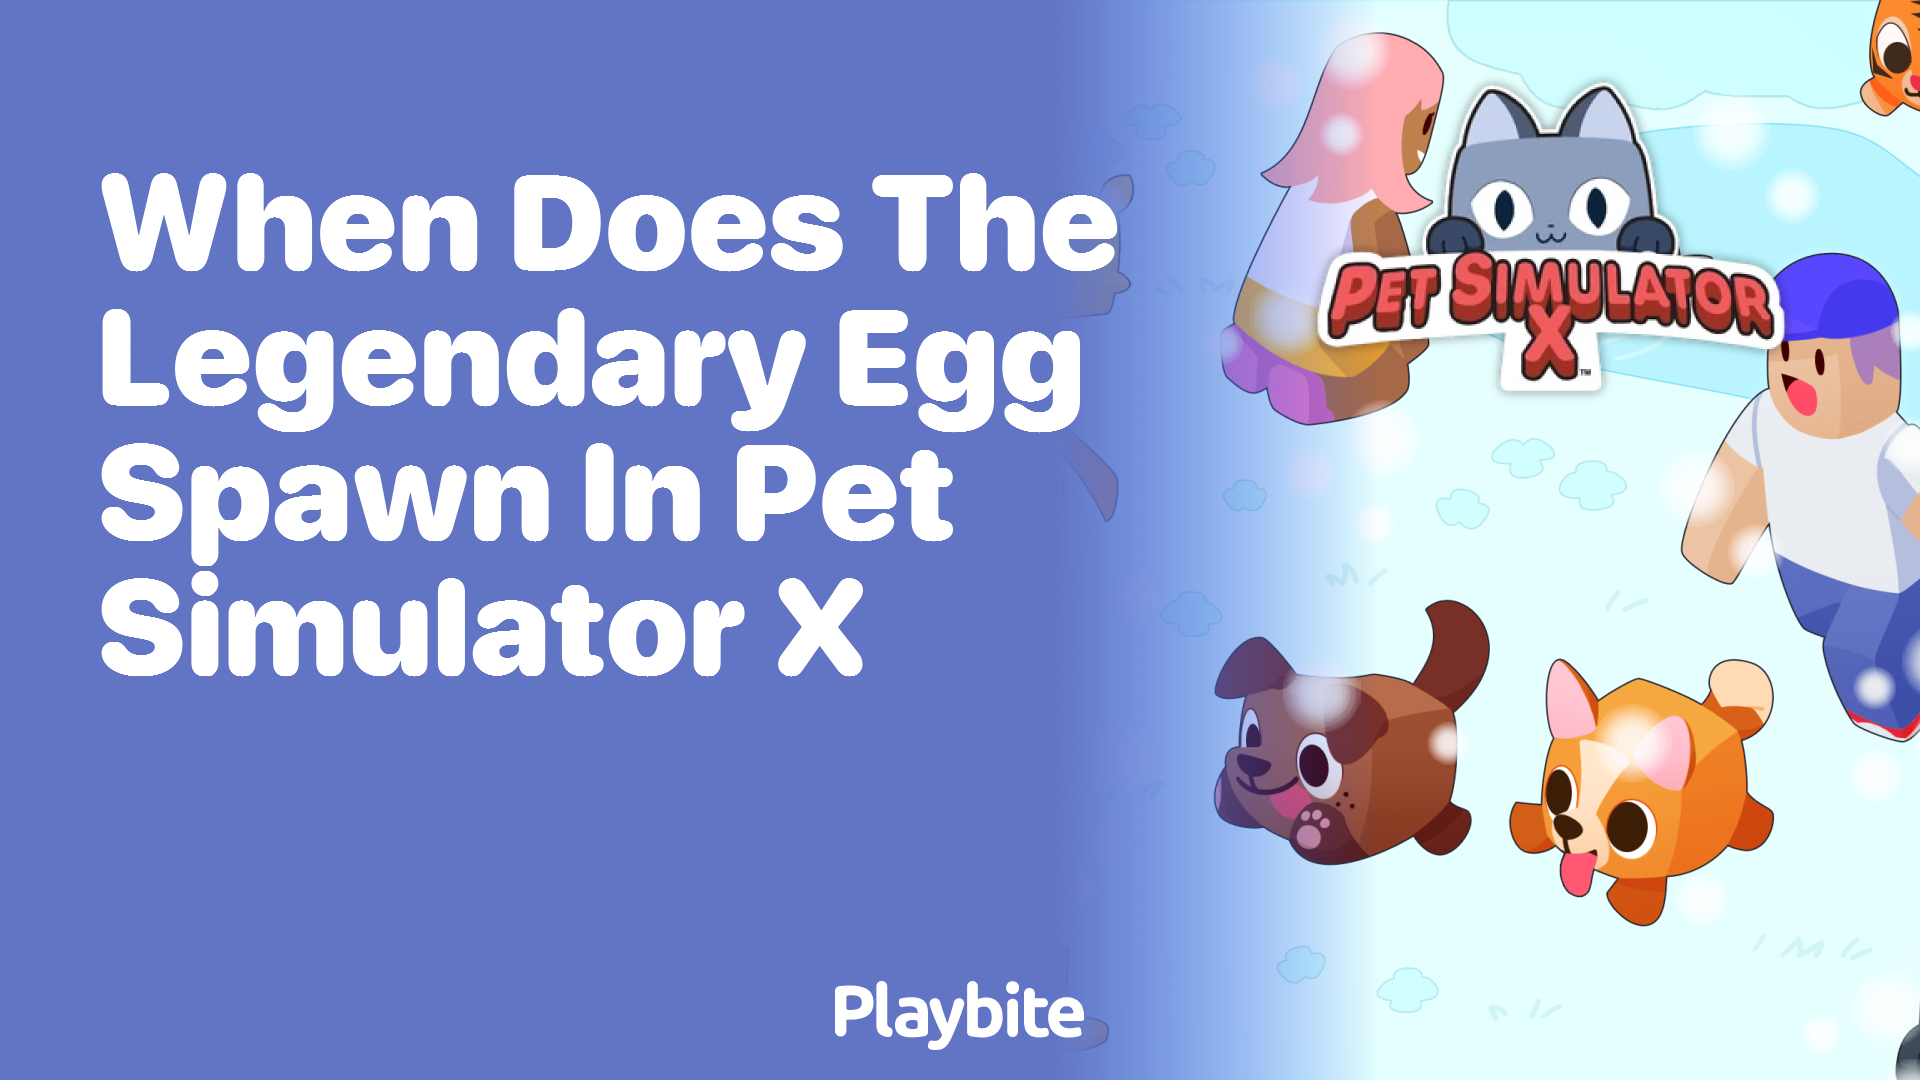 When Does the Legendary Egg Spawn in Pet Simulator X?